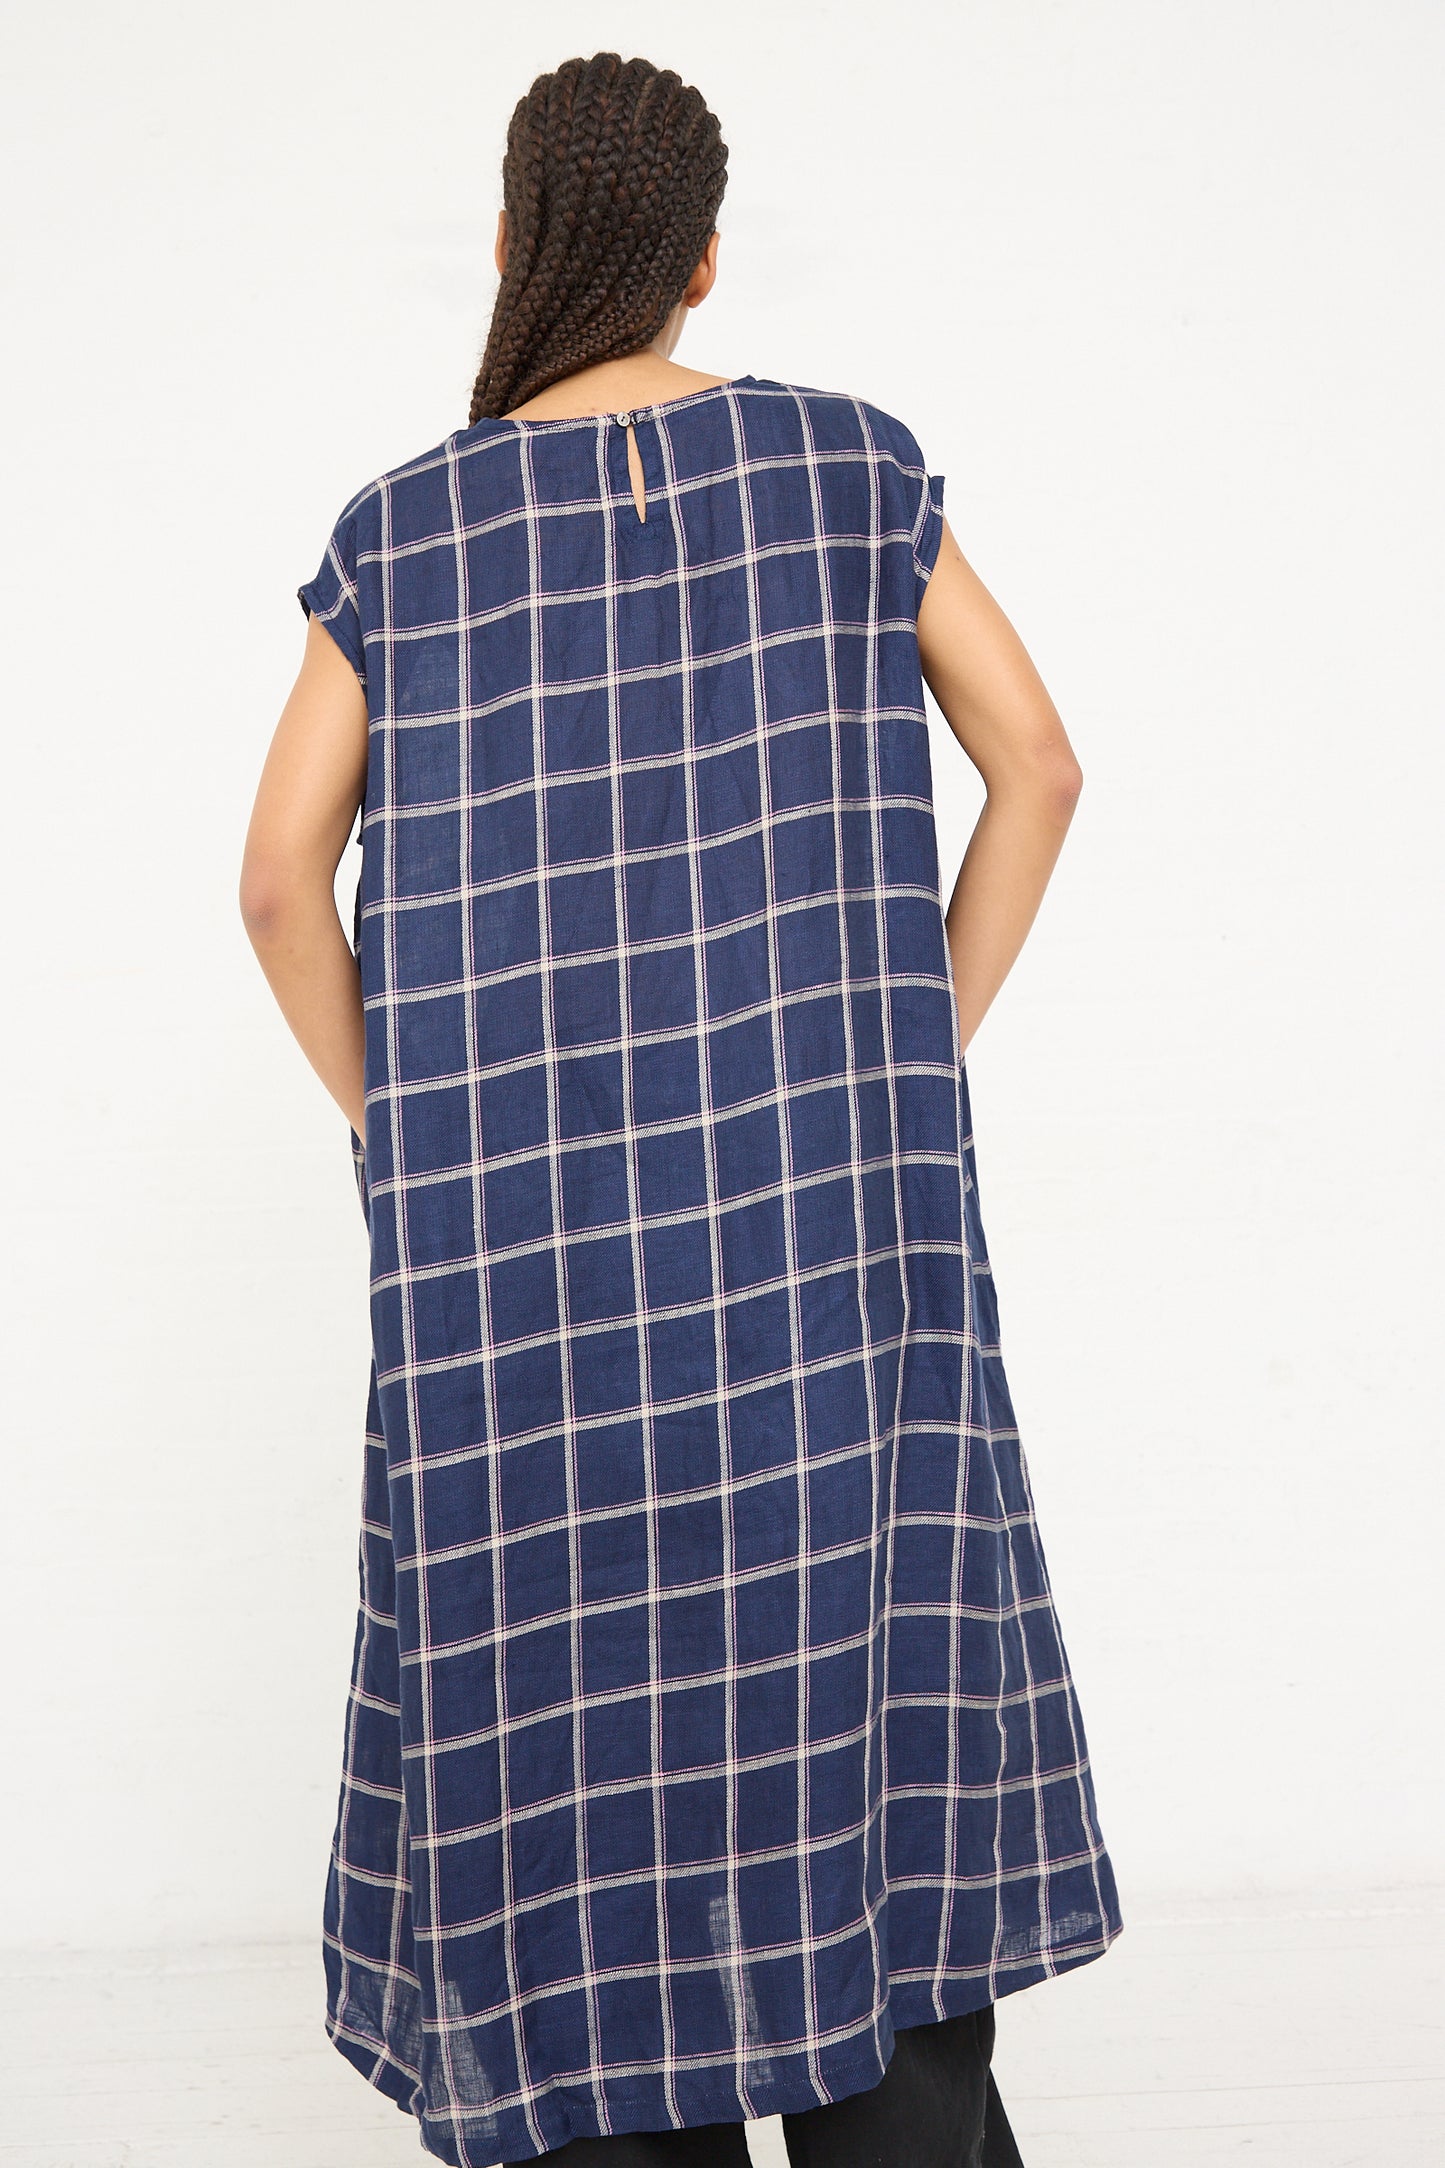 A person seen from behind wearing a long, sleeveless, Linen Check Dress in Navy with a simple neckline from Ichi Antiquités.